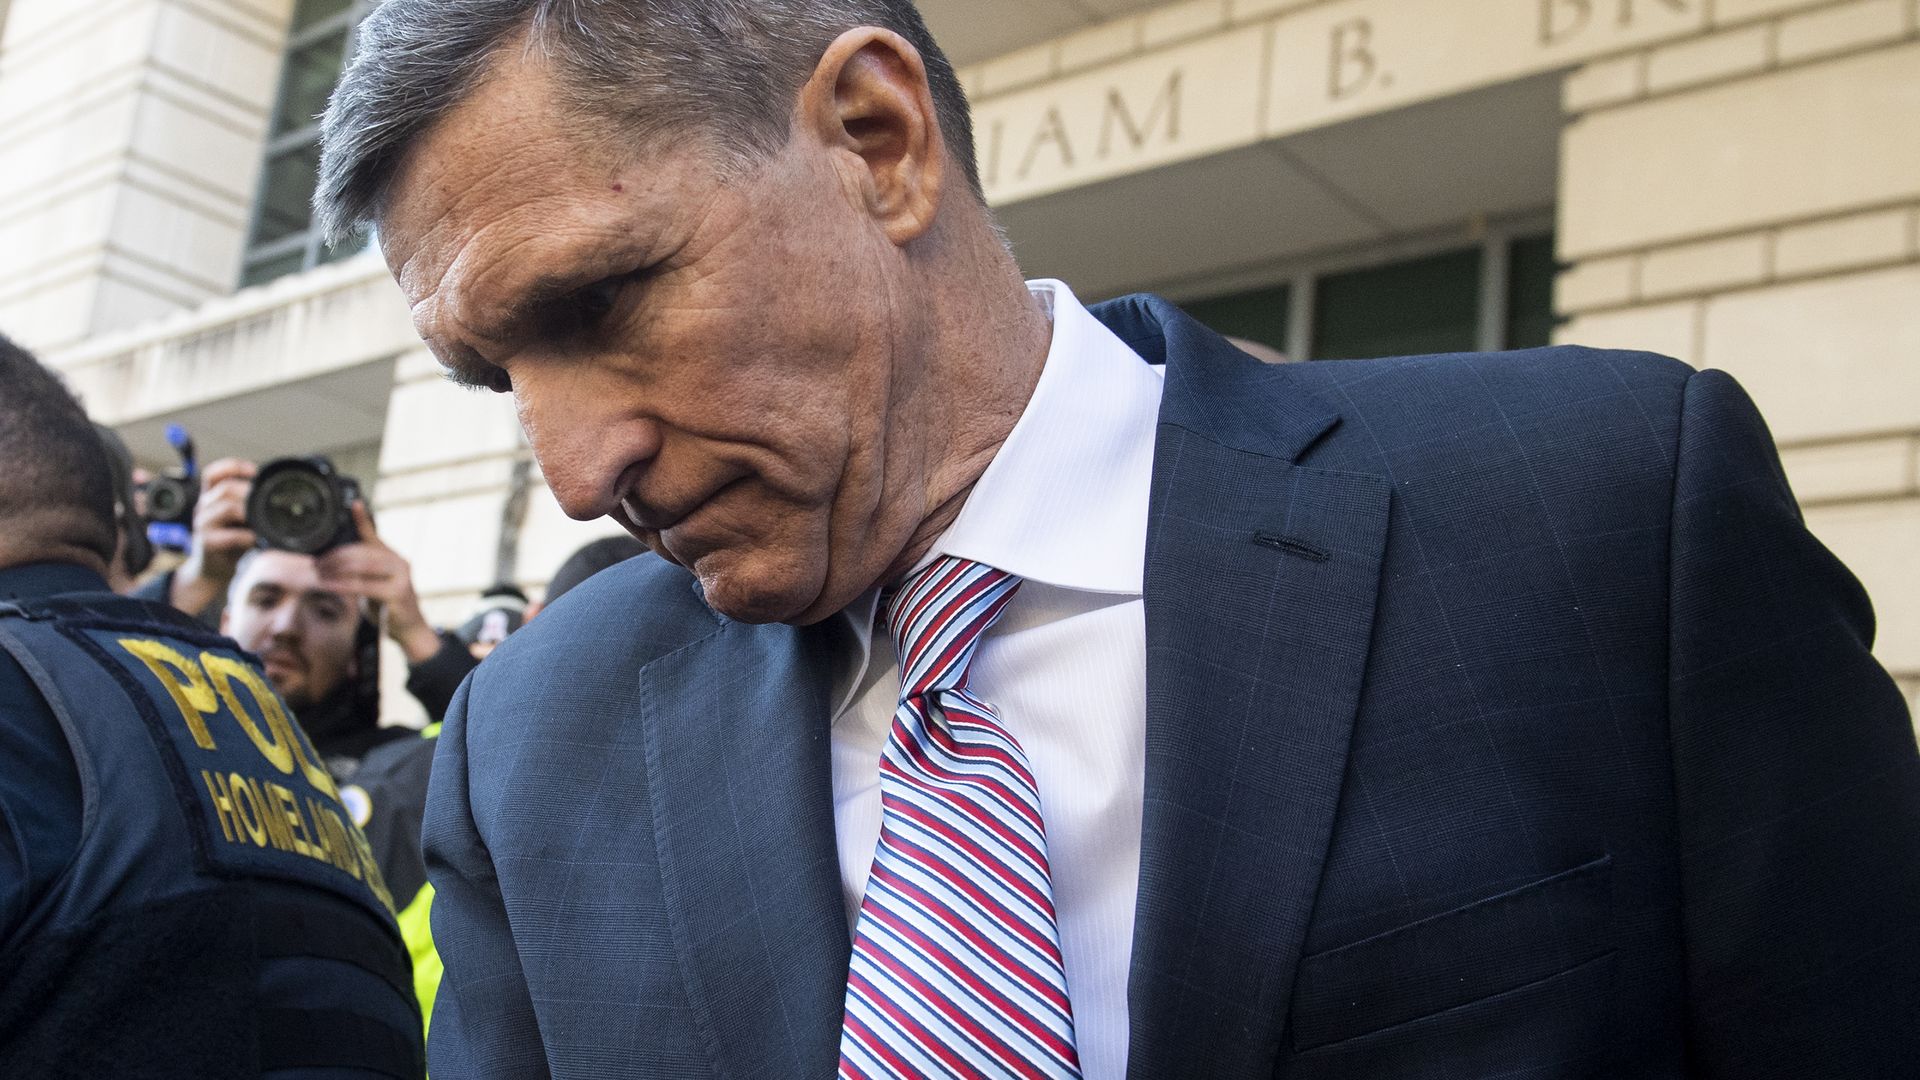 Former National Security Advisor General Michael Flynn leaves after the delay in his sentencing hearing